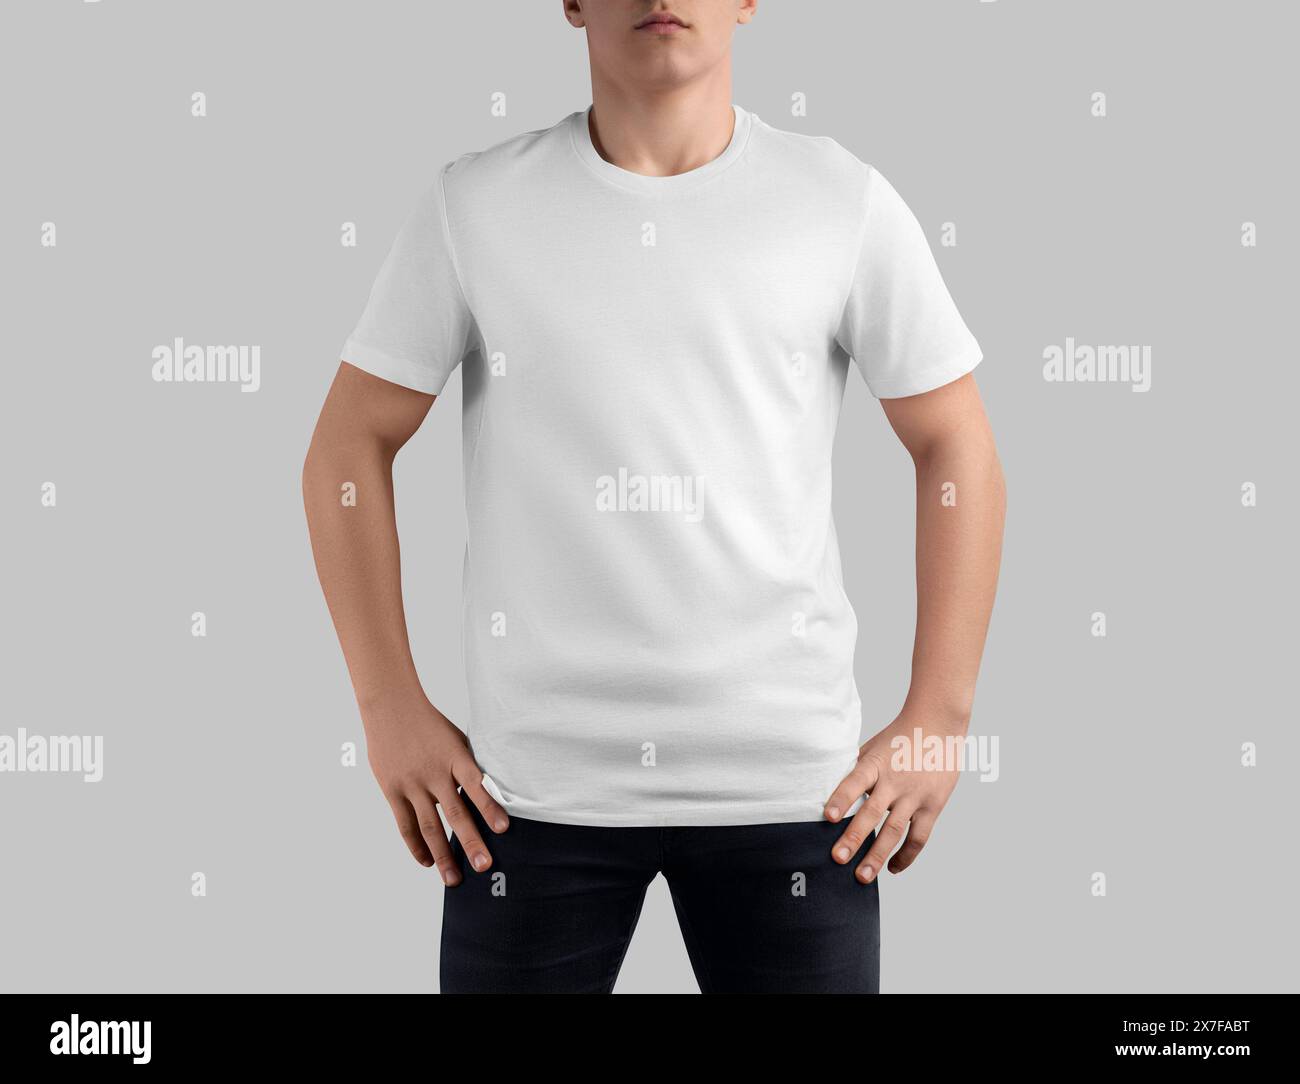 White t-shirt mockup on guy in black jeans, crew neck shirt for design, print, branding, front view. Template of fashionable casual clothes, men's app Stock Photo